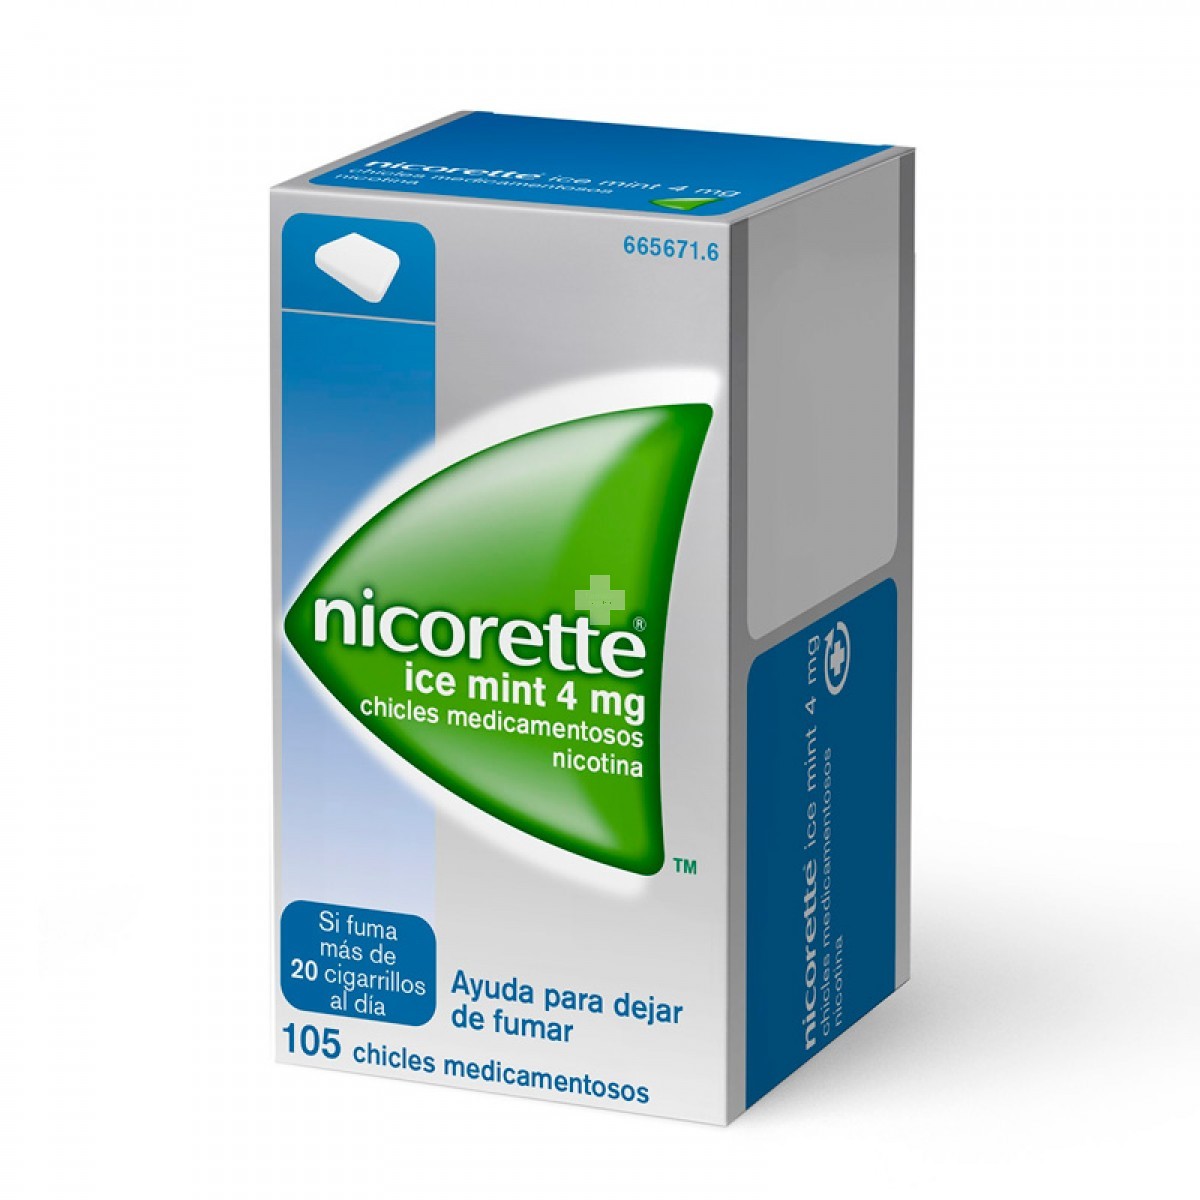 Nicorette Ice Mint 4 mg Chicles Medicamentosos - 105 Chicles